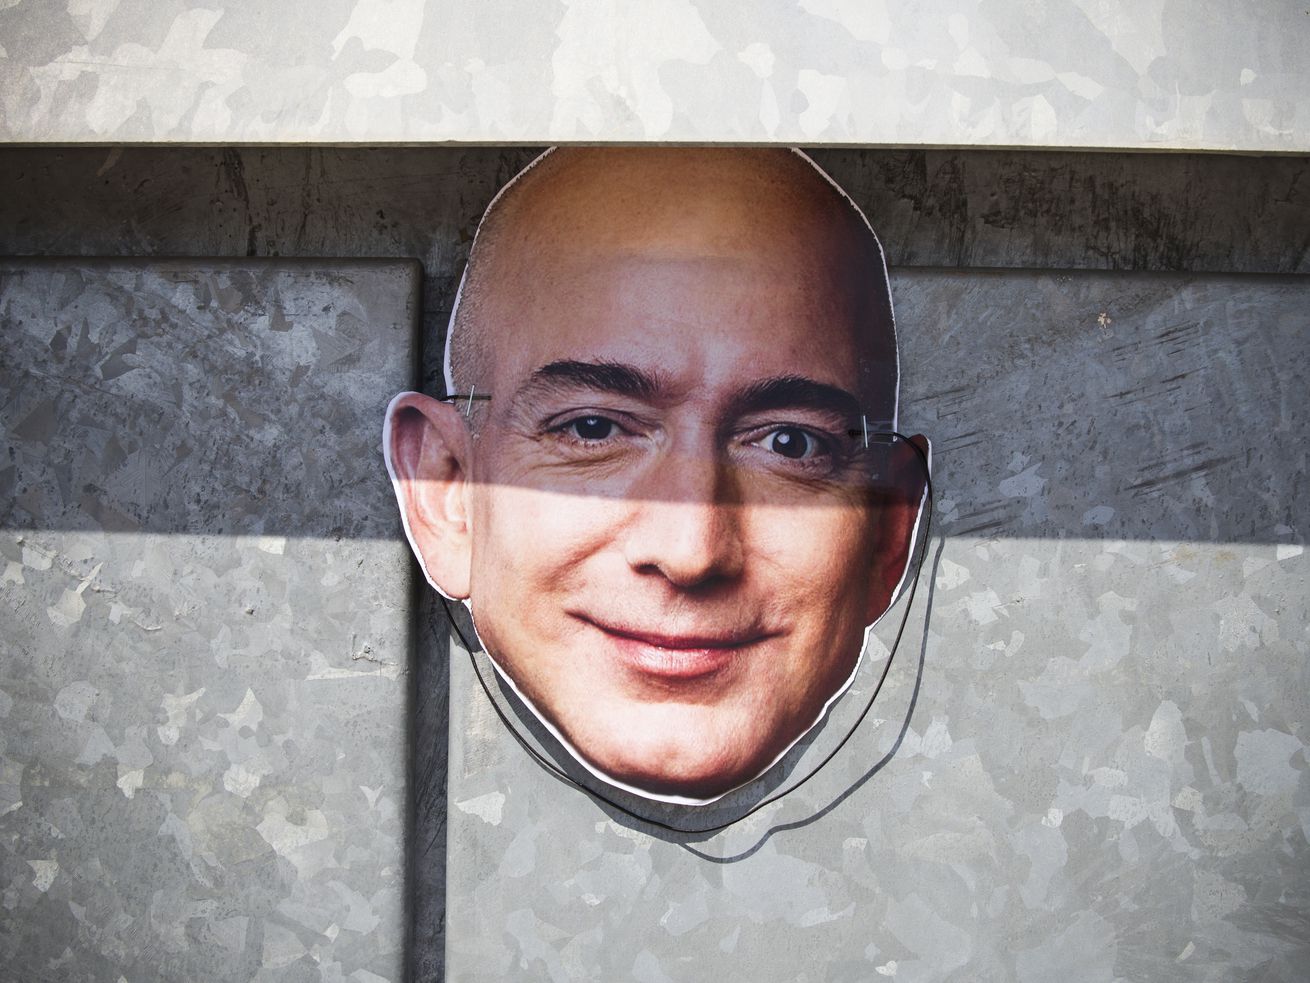 The second act of Jeff Bezos could be as big as his first